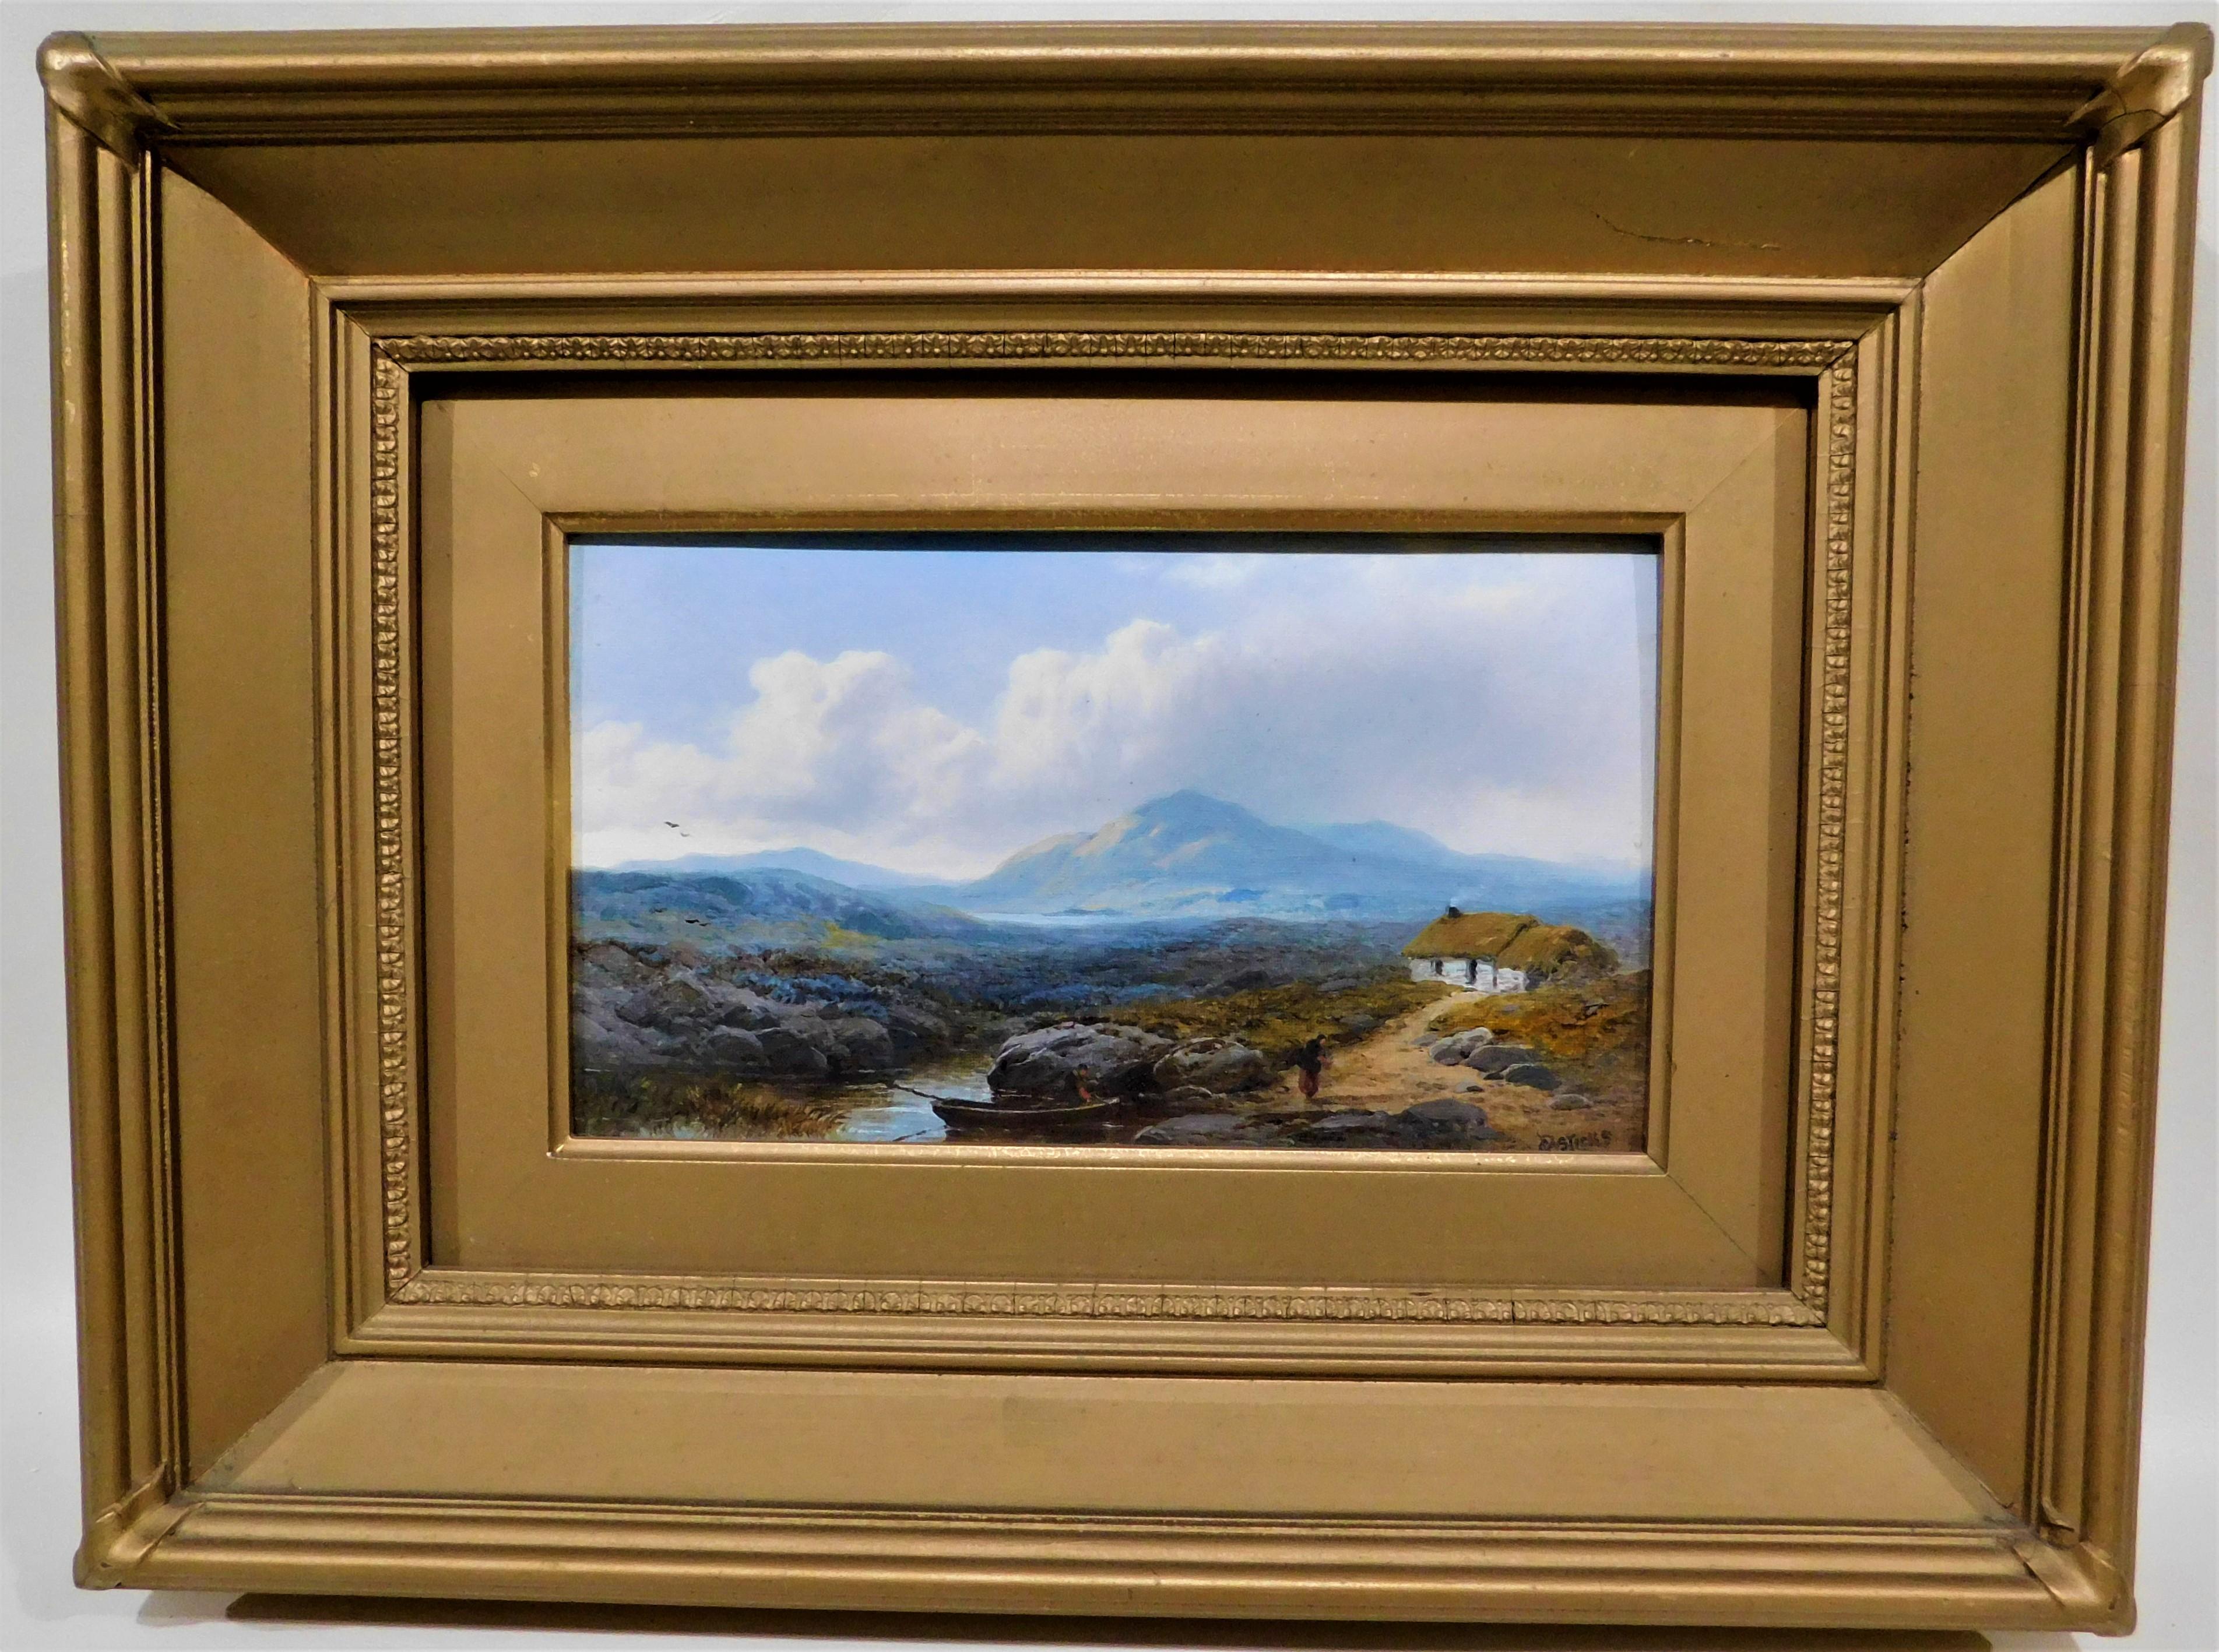 Nicely framed original George Blackie Sticks oil on canvas painting. There is writing on the back that we can't quite make out but it is name of the painting and the artist signature is correct on the front right lower corner. Painting size: 9.5 x